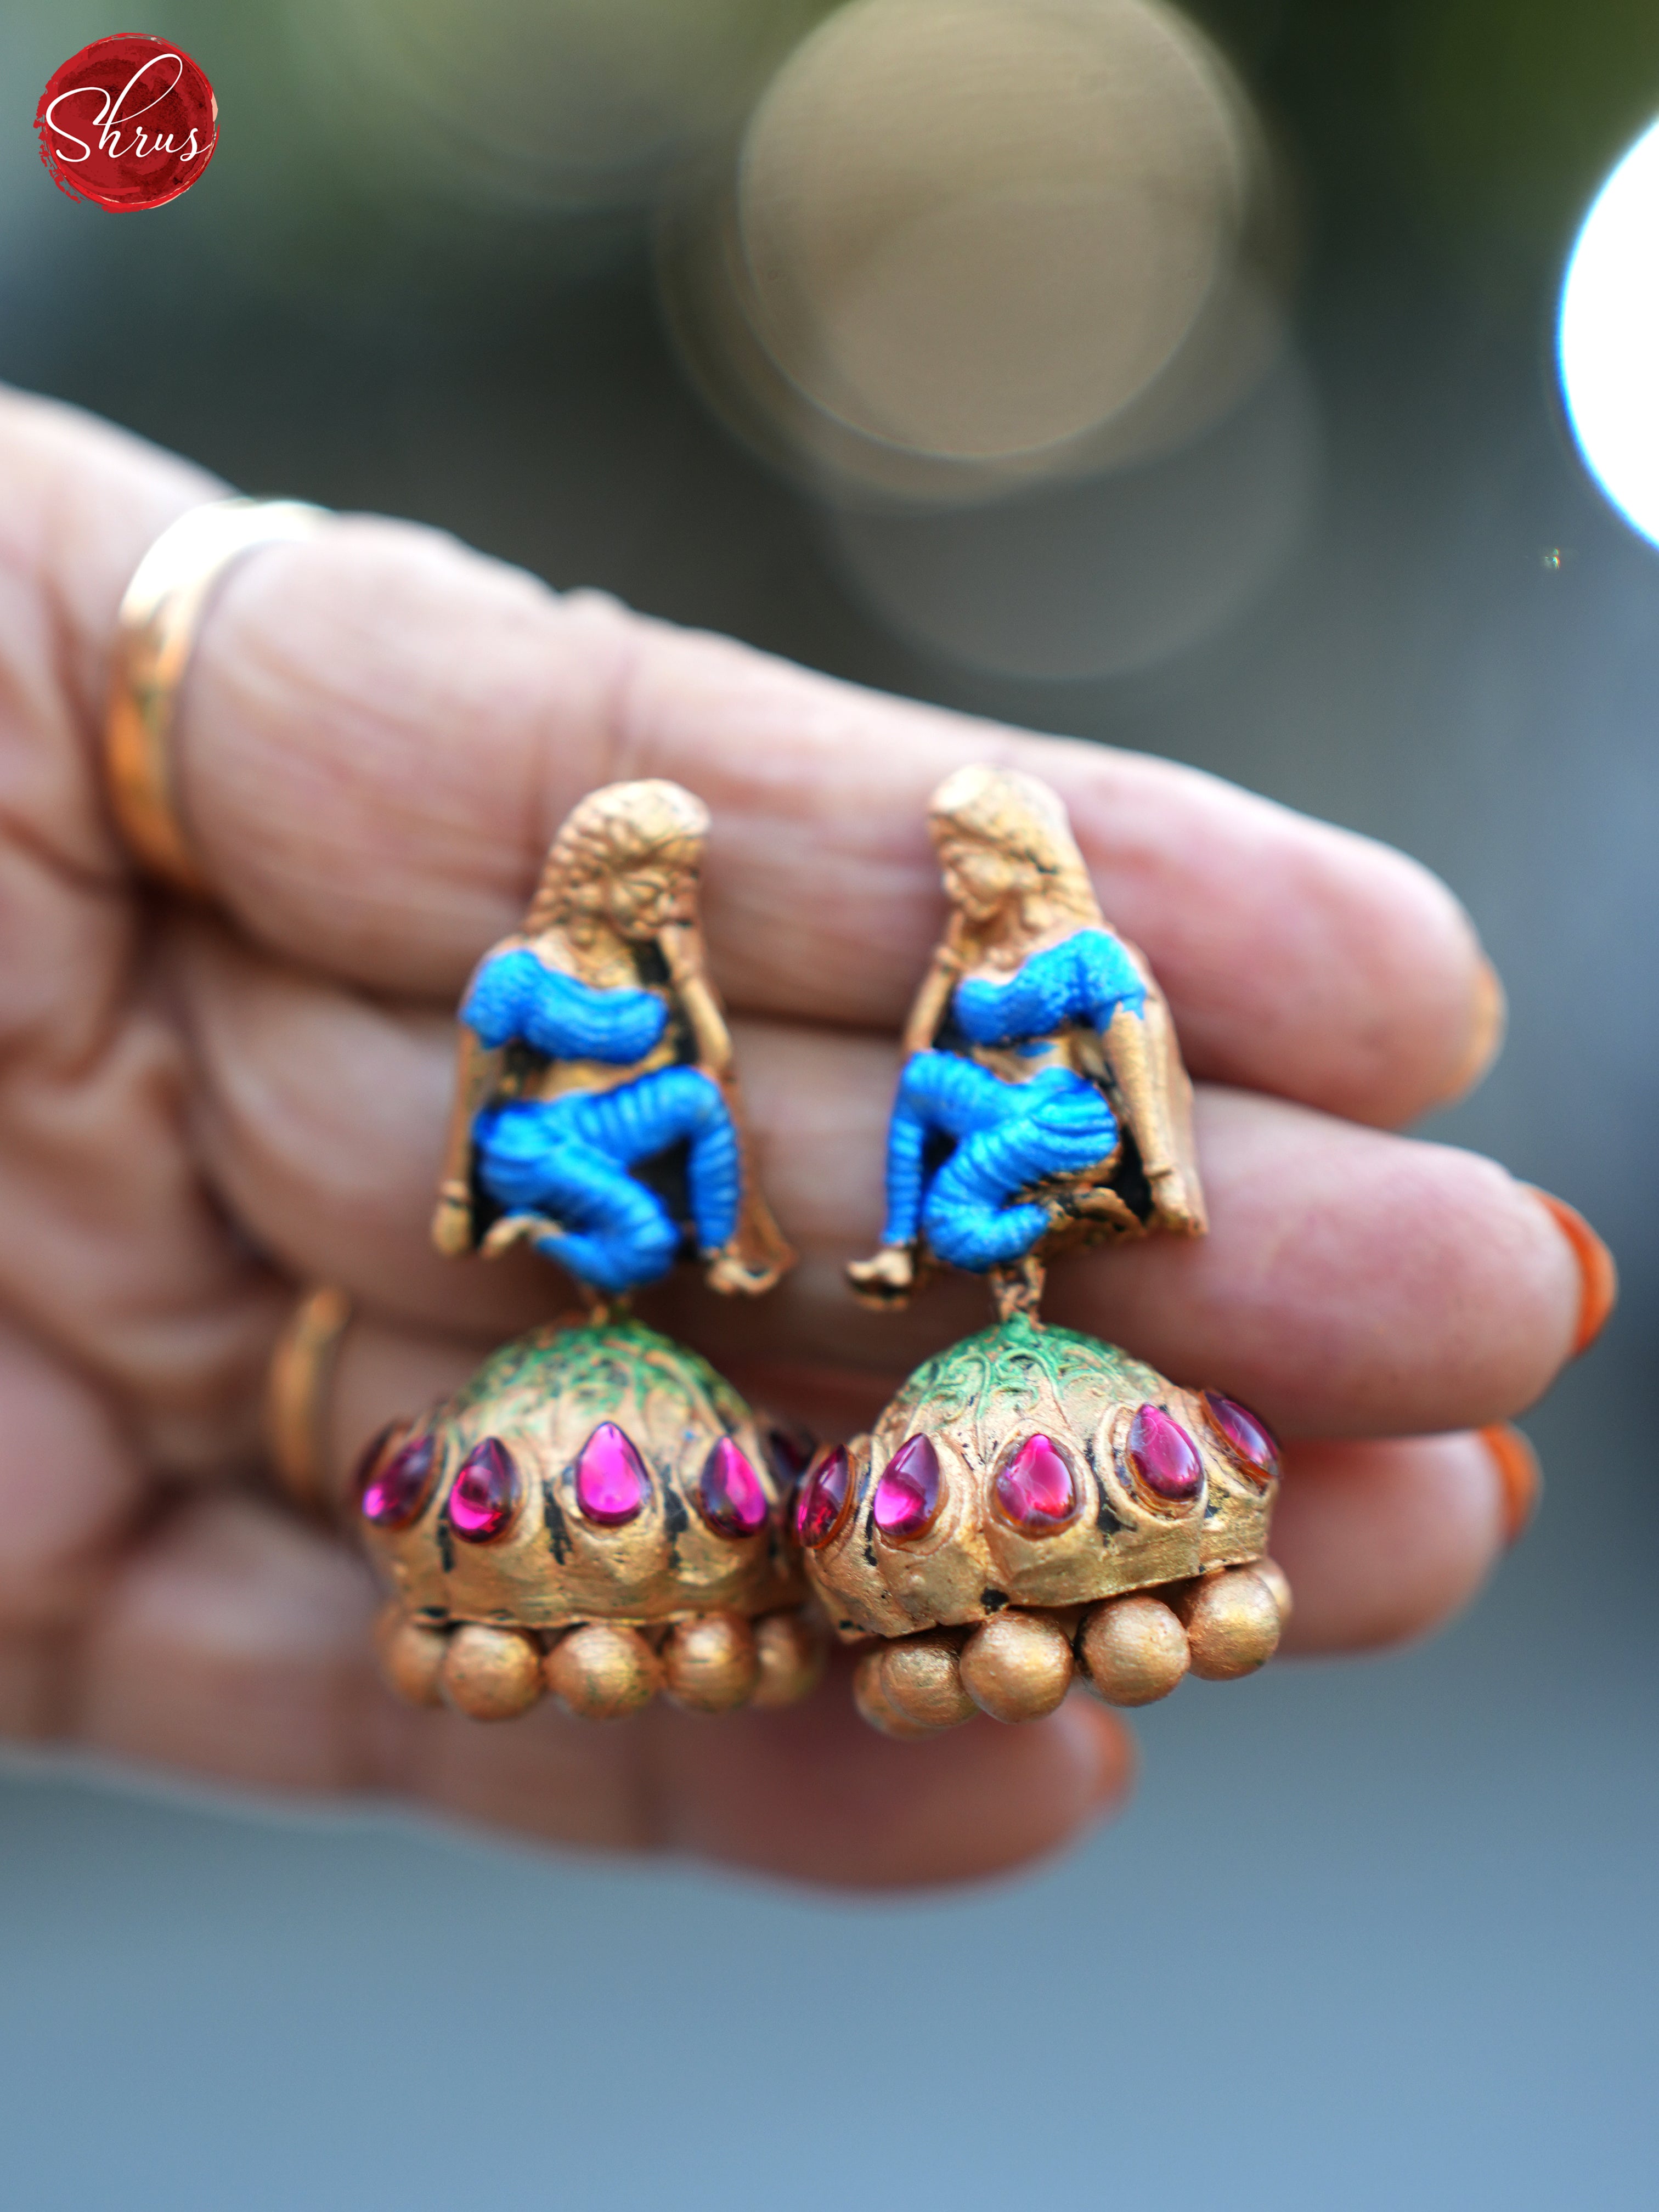 Handcrafted Pallaki pendant terracotta necklace with jhumkas  - Accessories - Shop on ShrusEternity.com